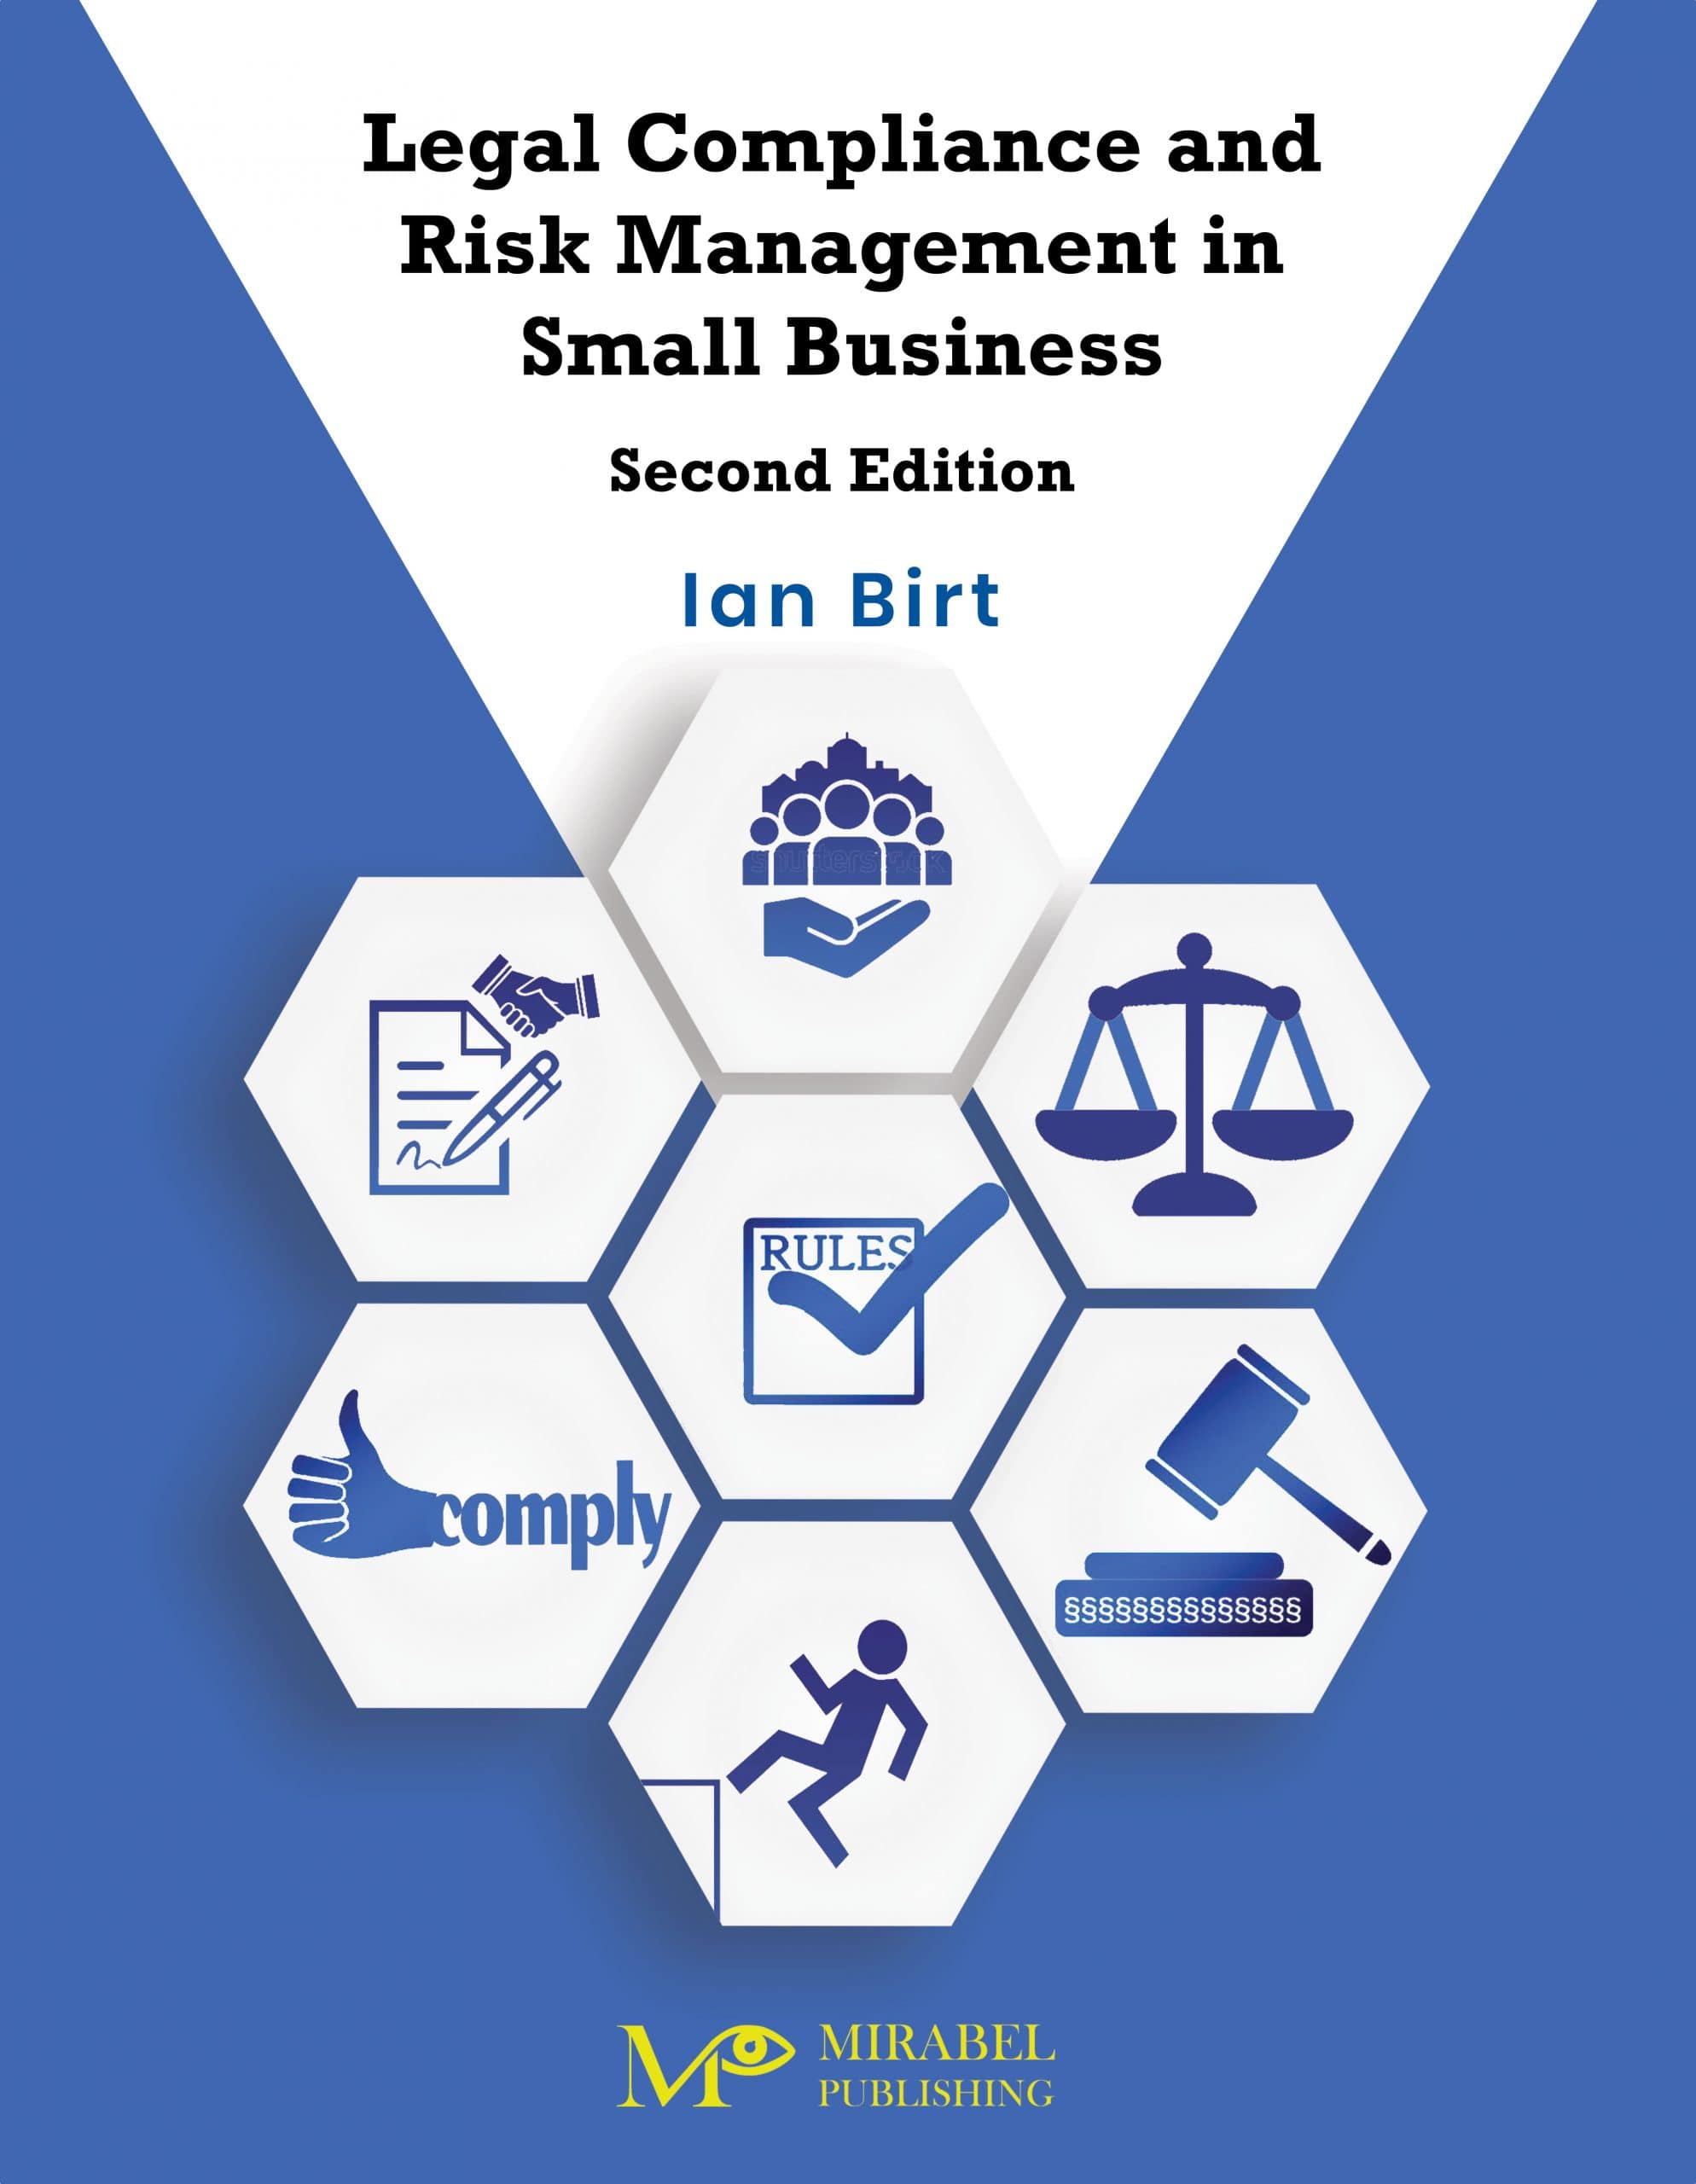 Legal Compliance and Risk Management in Small Business (Second Edition)